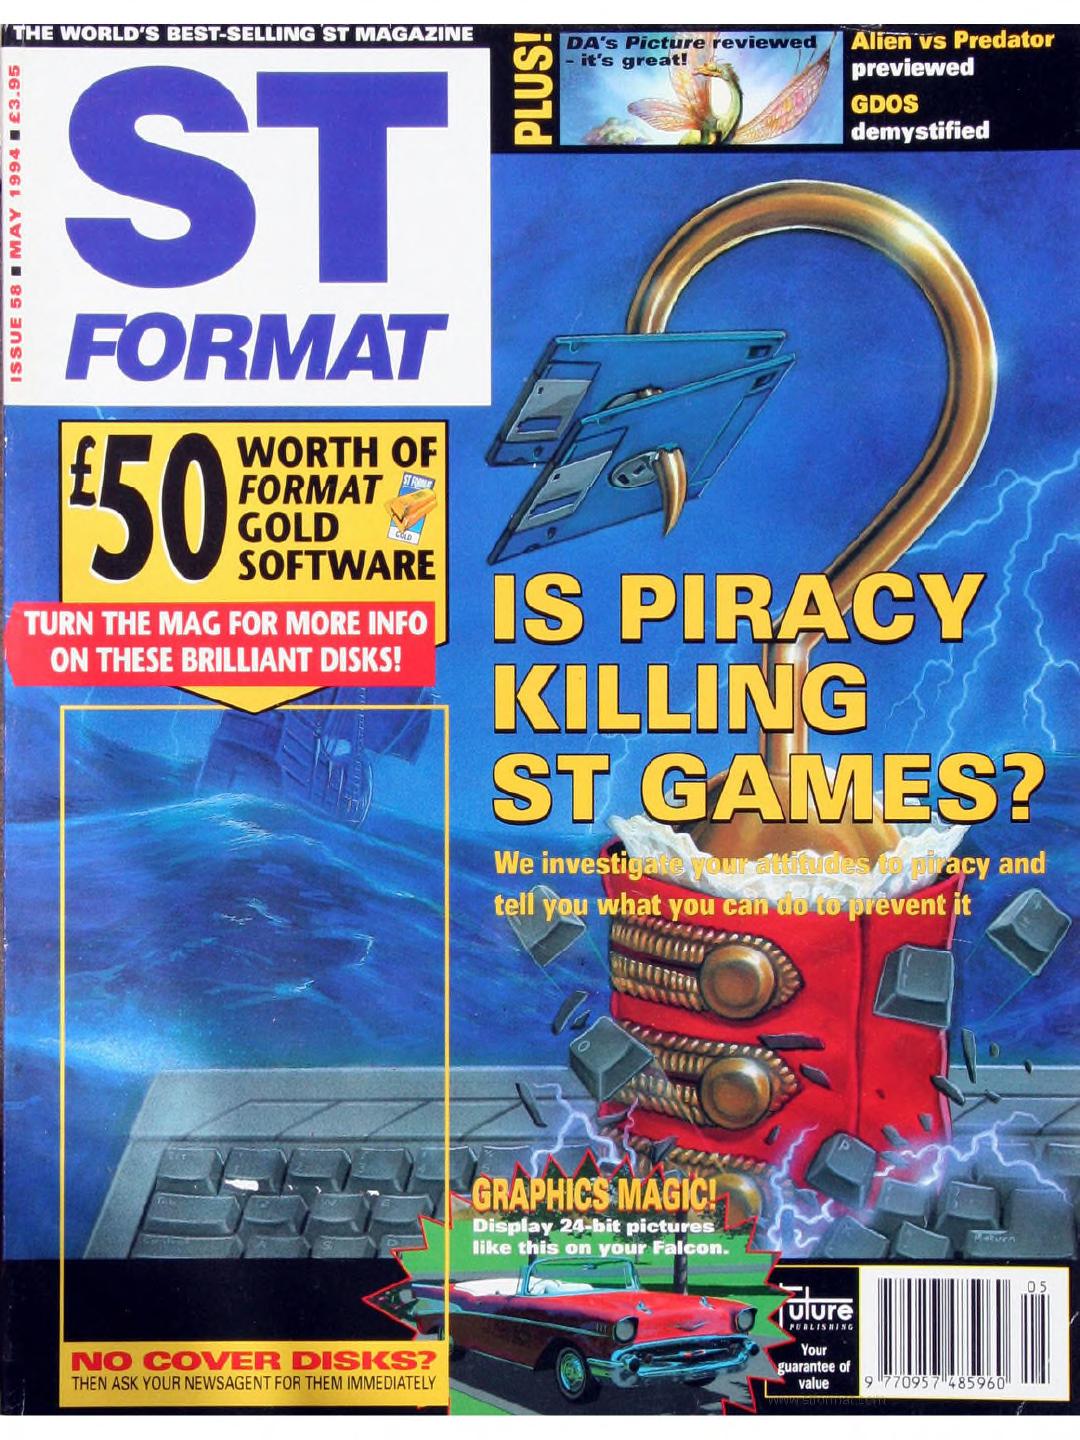 Cover for ST Format 58 (May 1994)